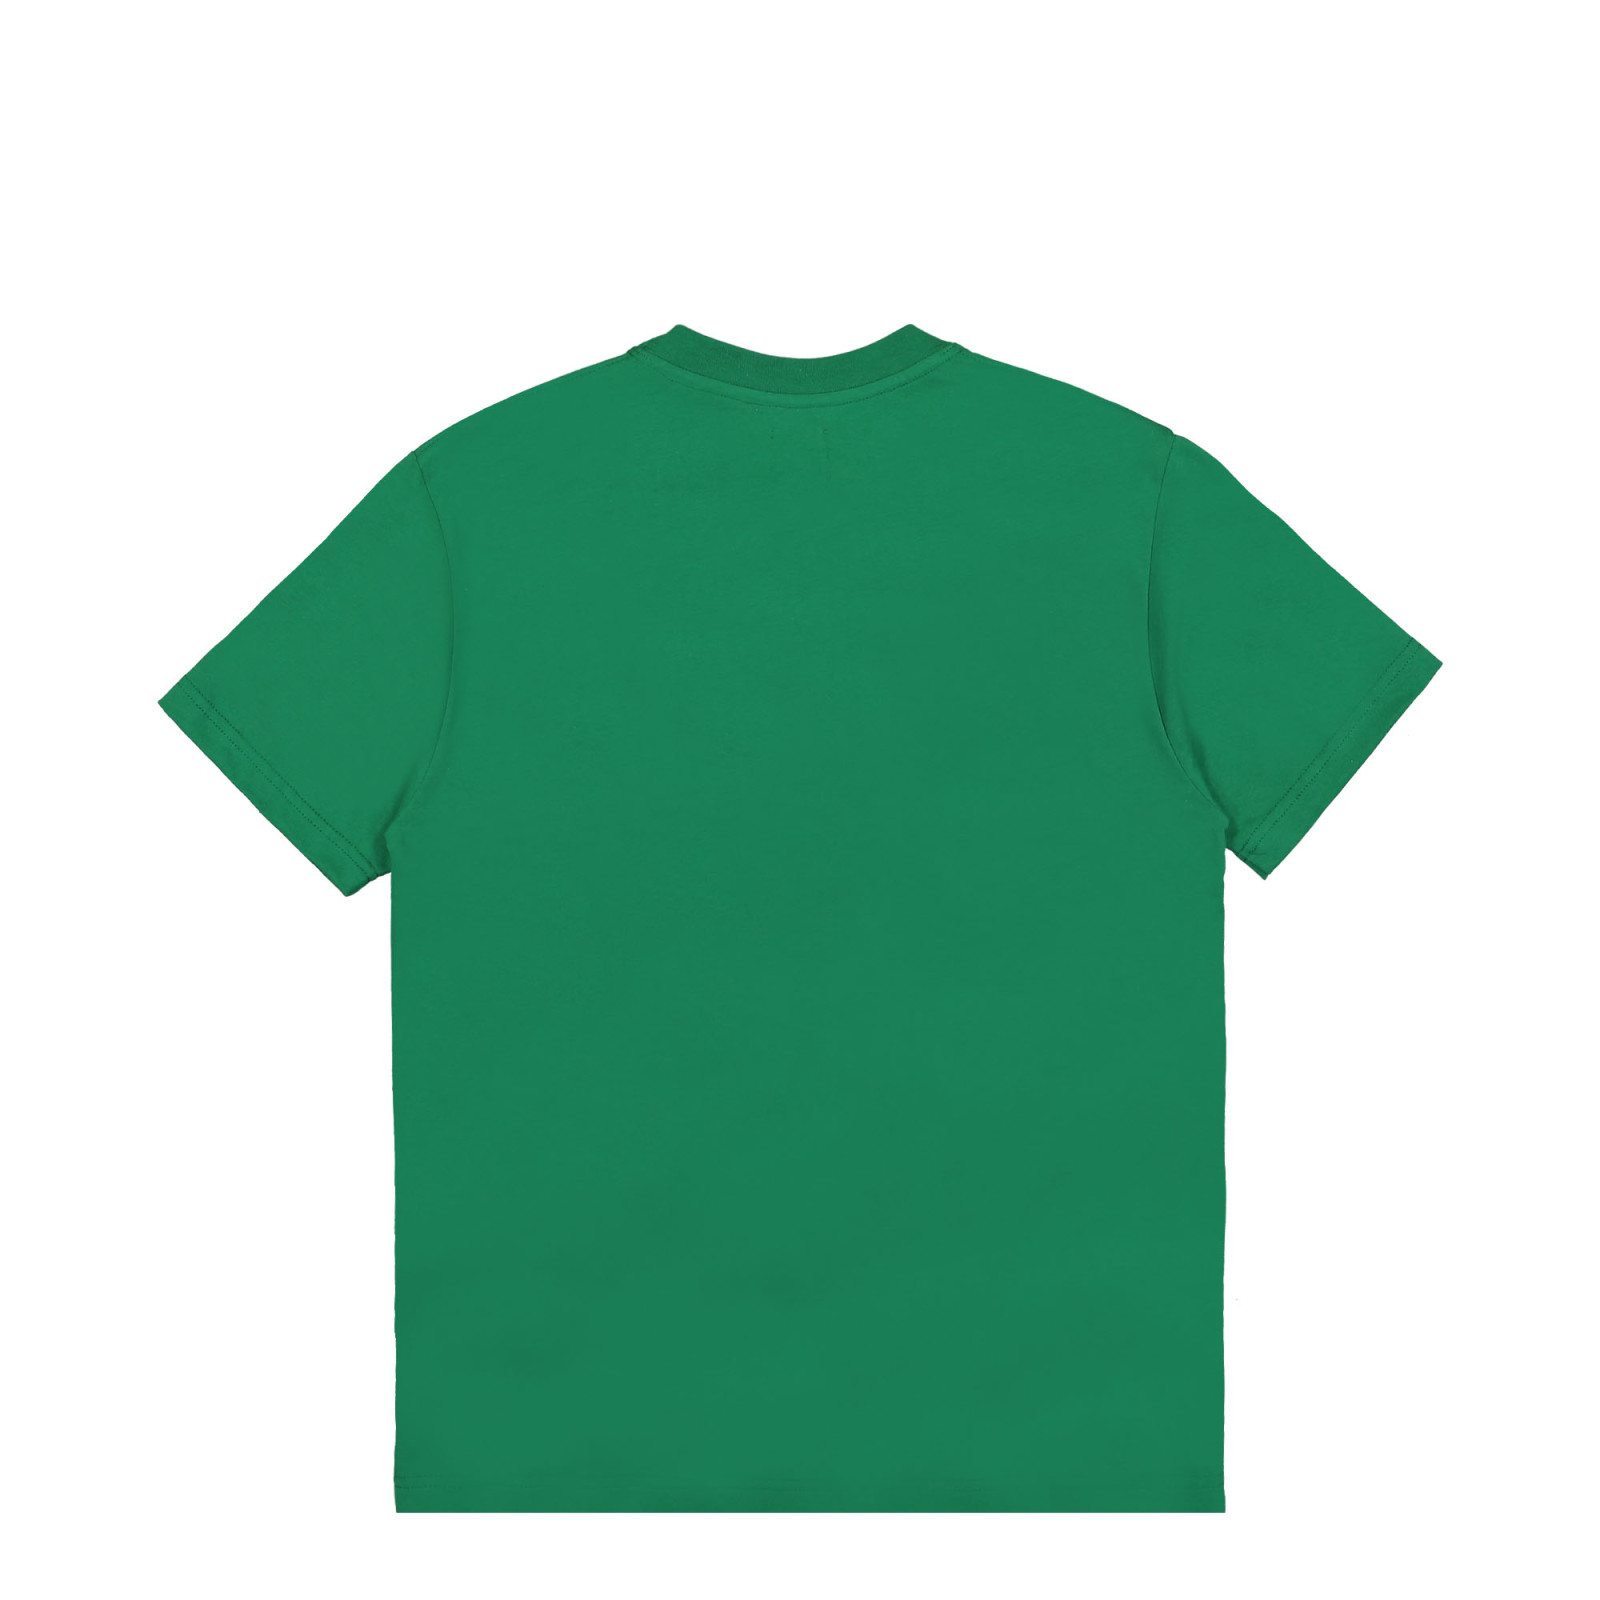 New Balance Made In USA
Core SS Tee
Classic Pine